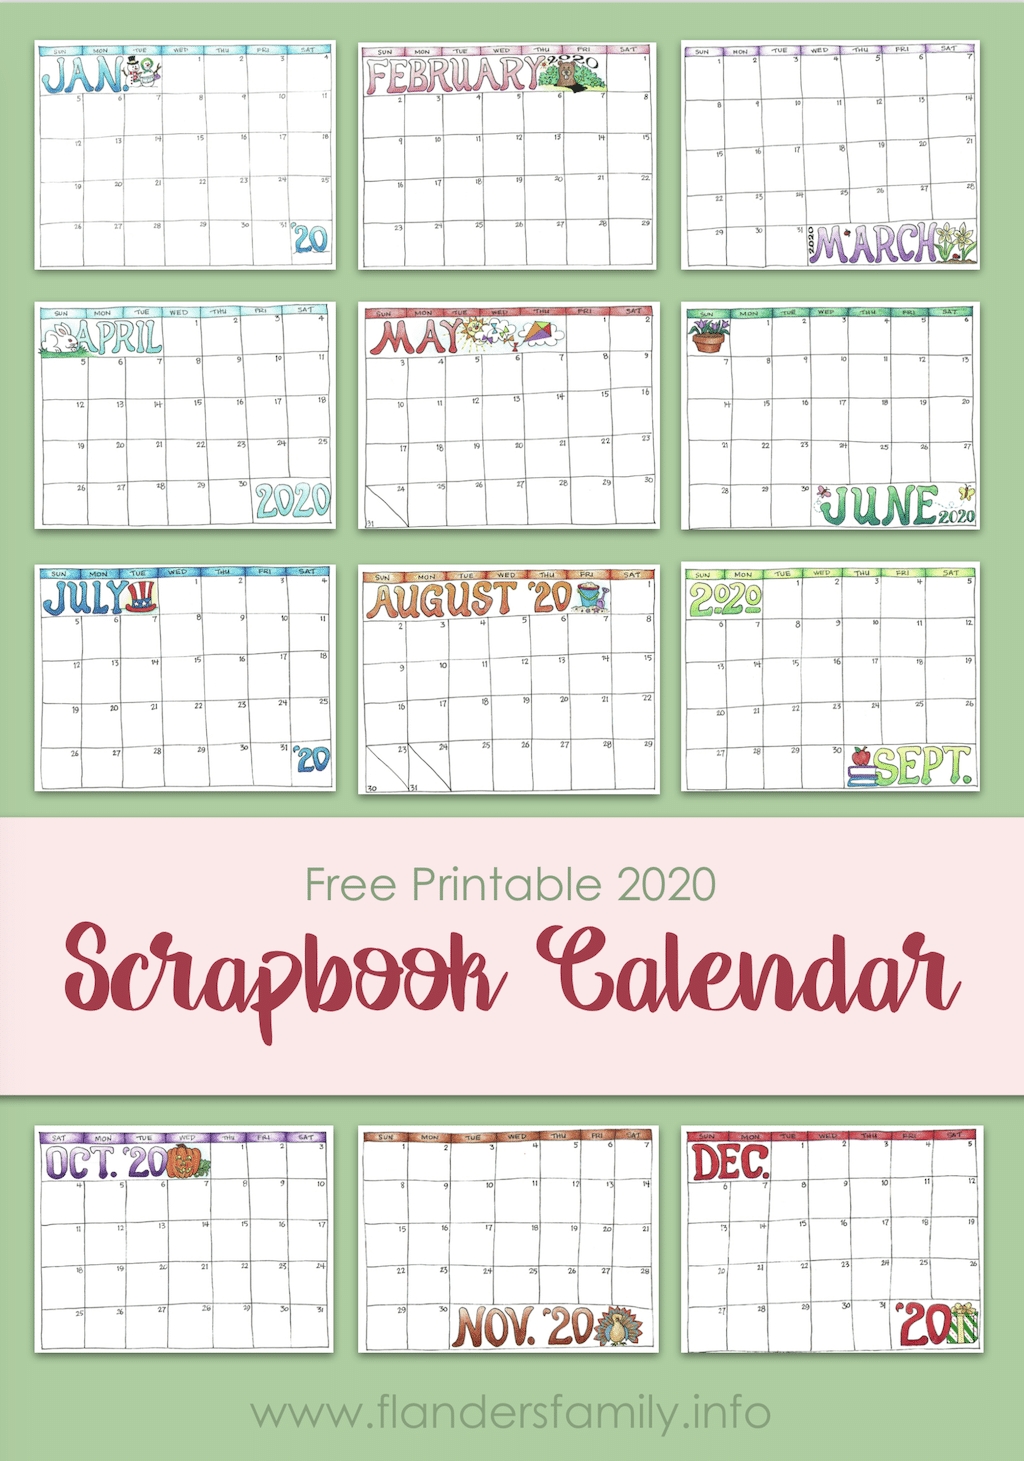 Reader Request: 2020 Scrapbooking Calendar - Flanders Family Exceptional Free Month At Glance Calendar